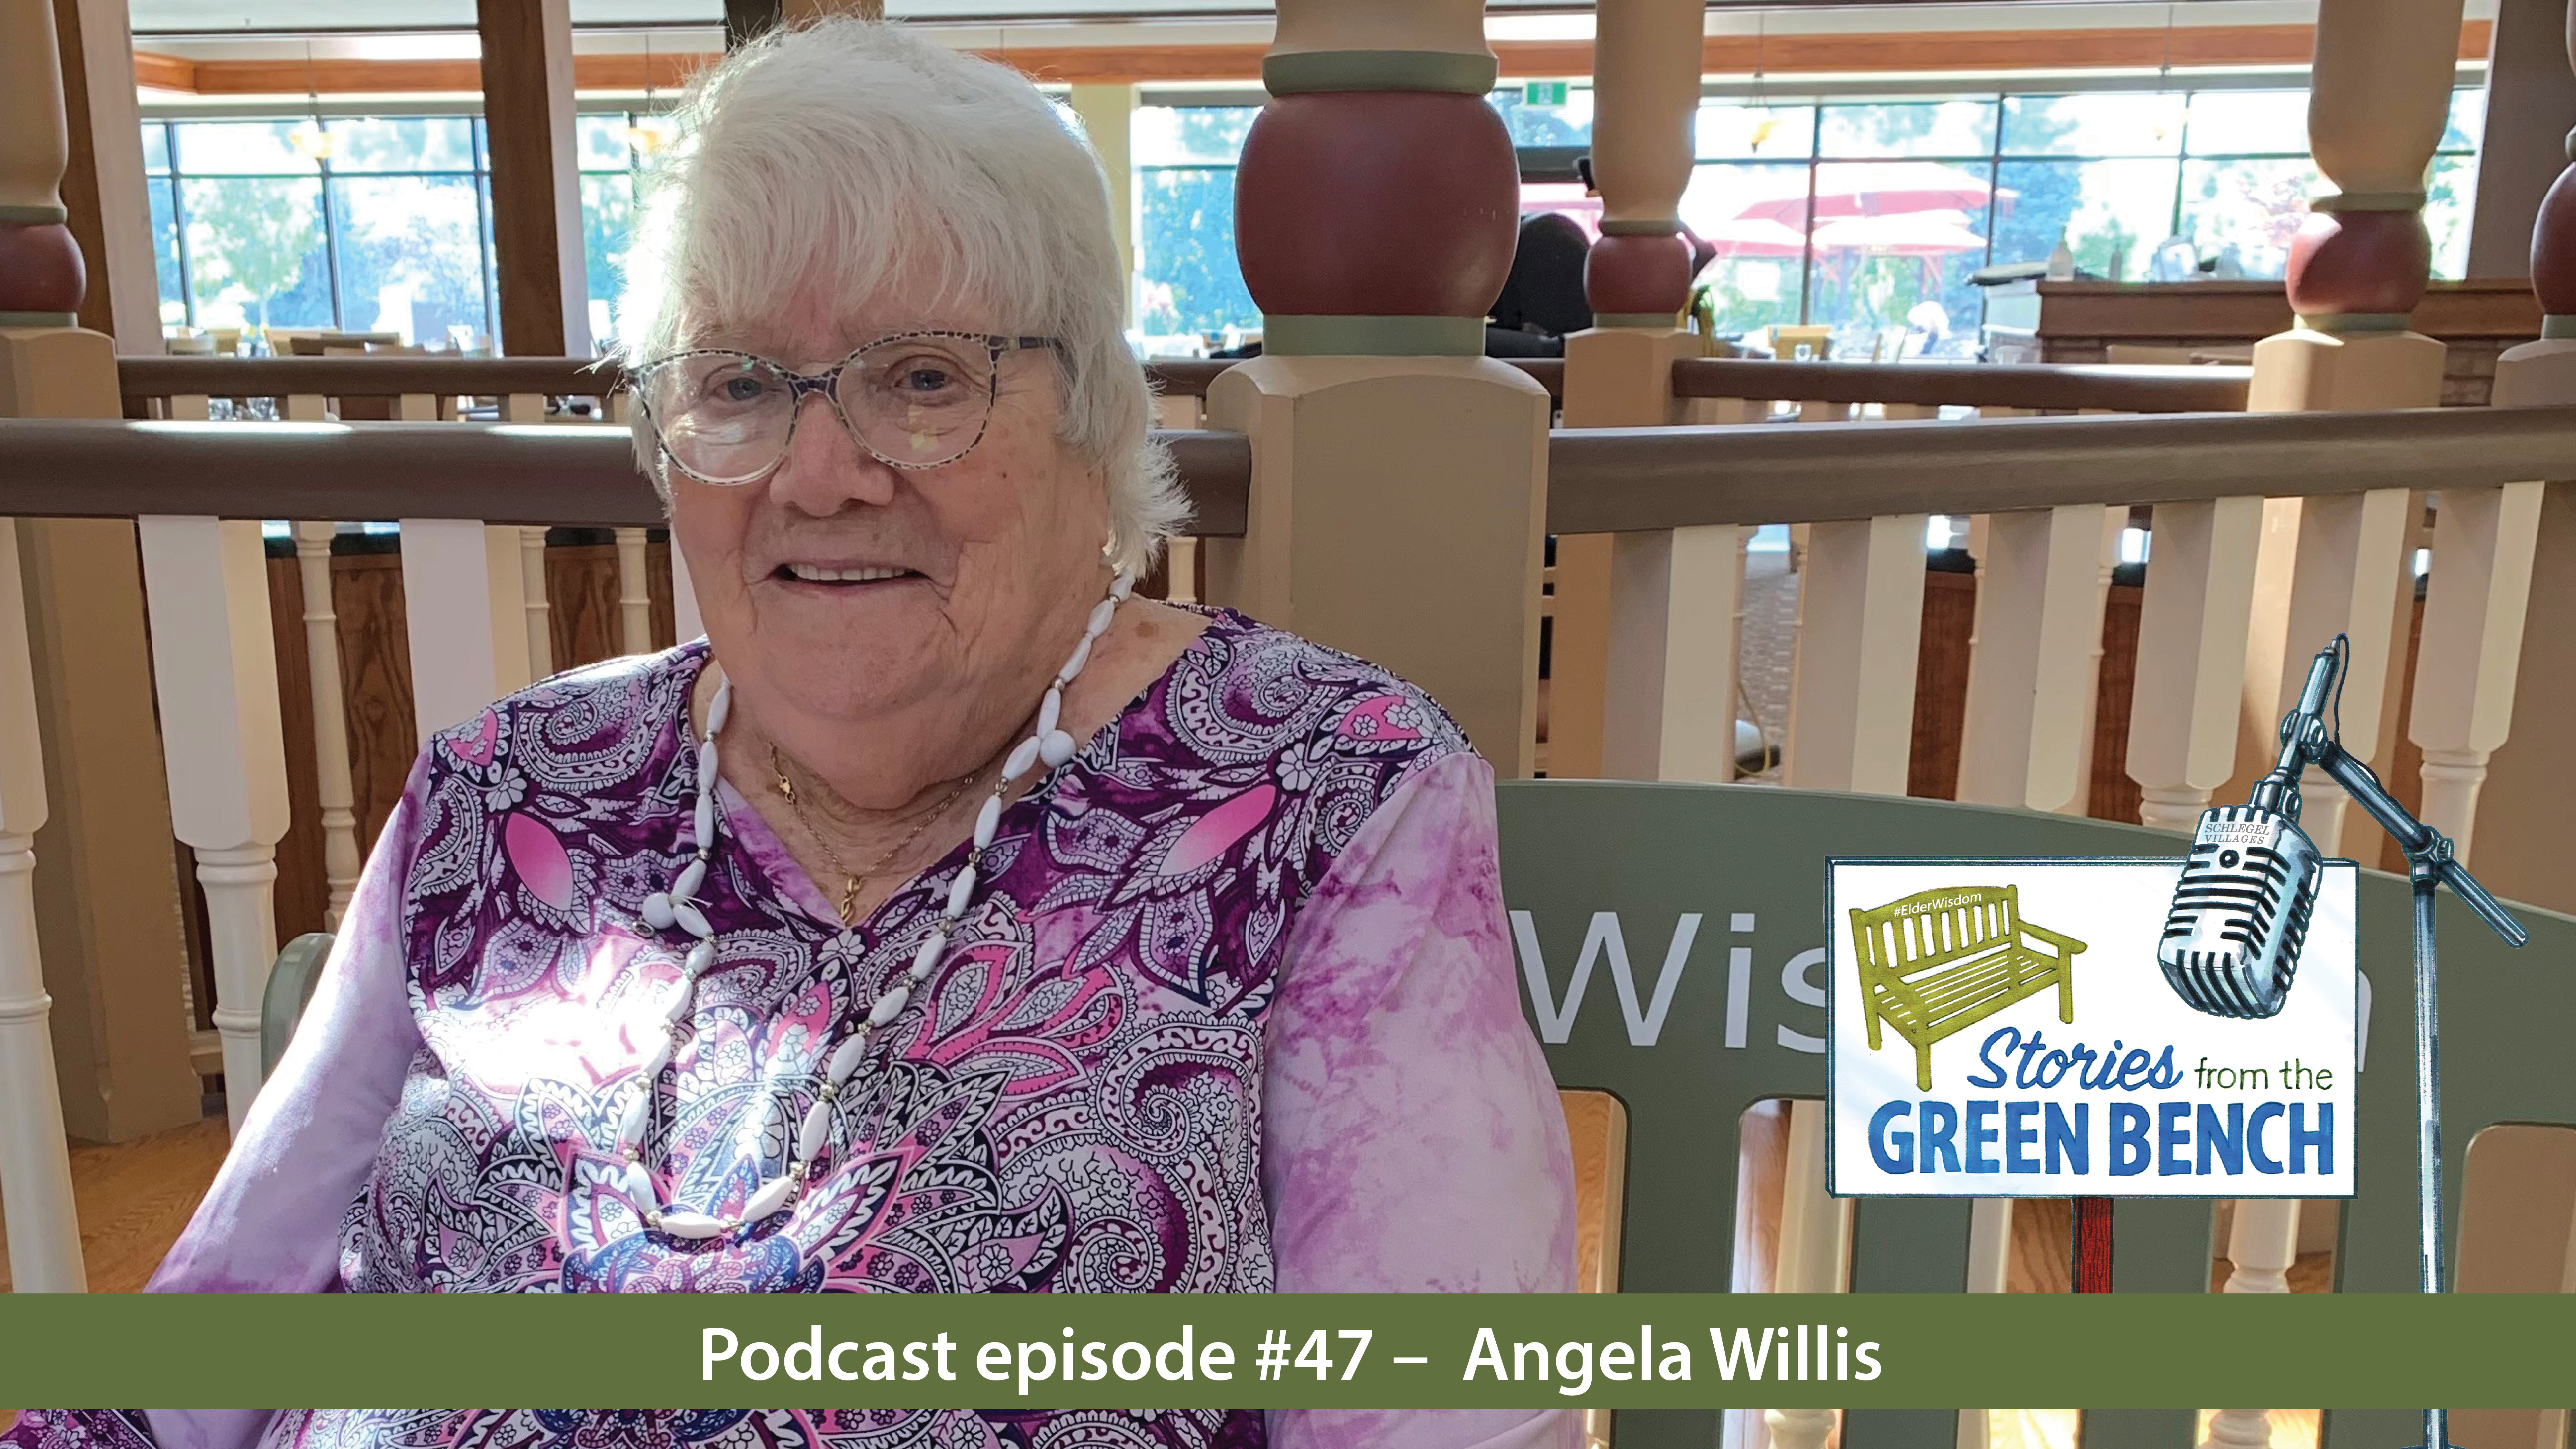 Podcast Episode #47 - Angela Willis sitting on the green bench